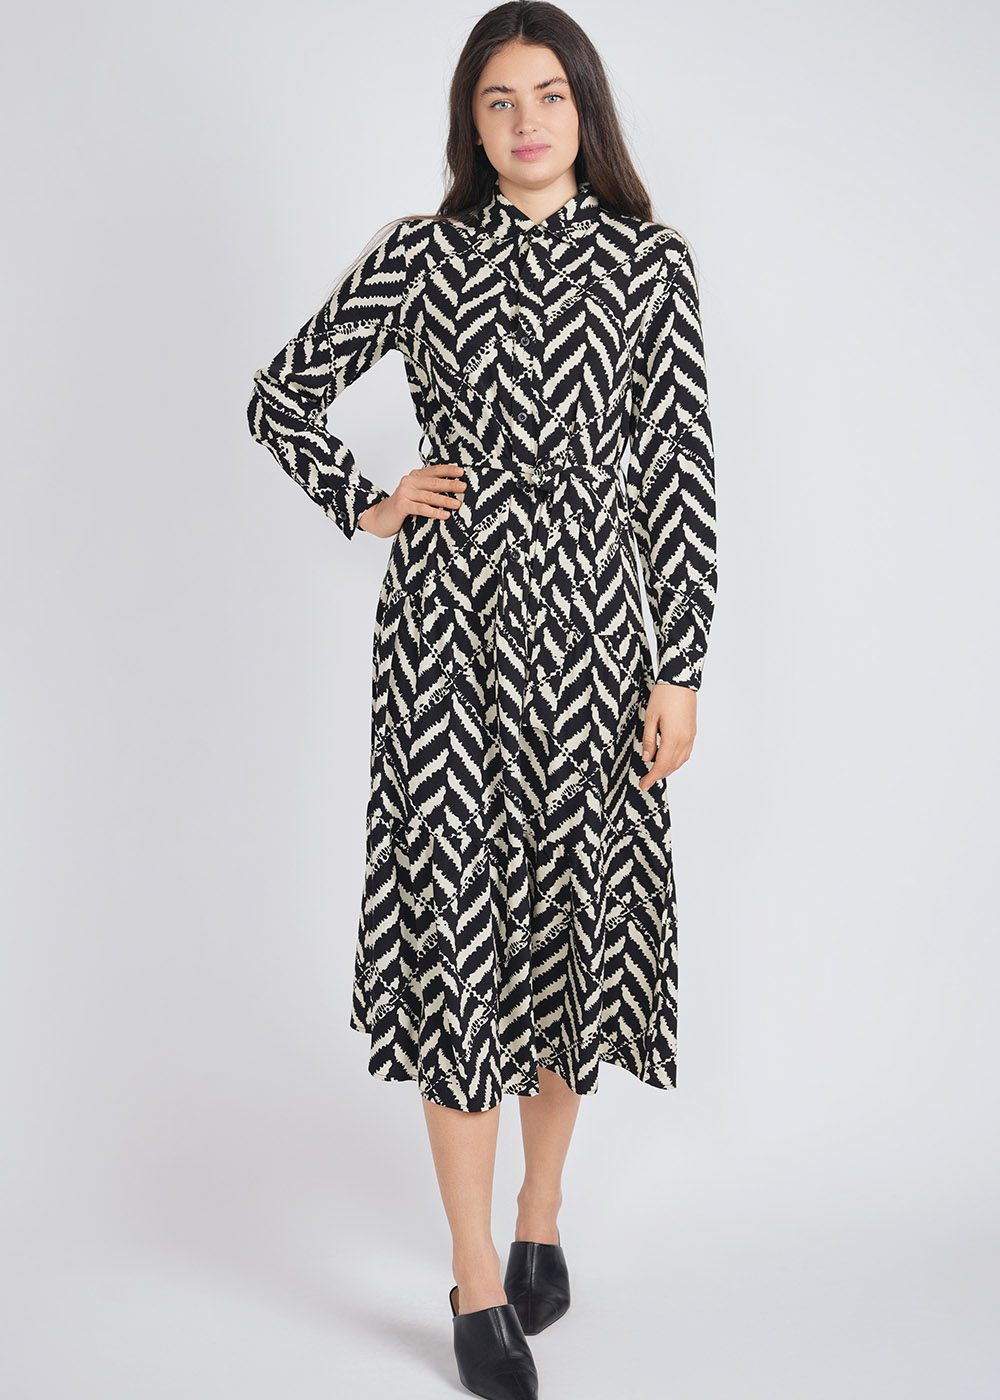 Long-Sleeved Black & White Dress with Classic Shirt Neckline